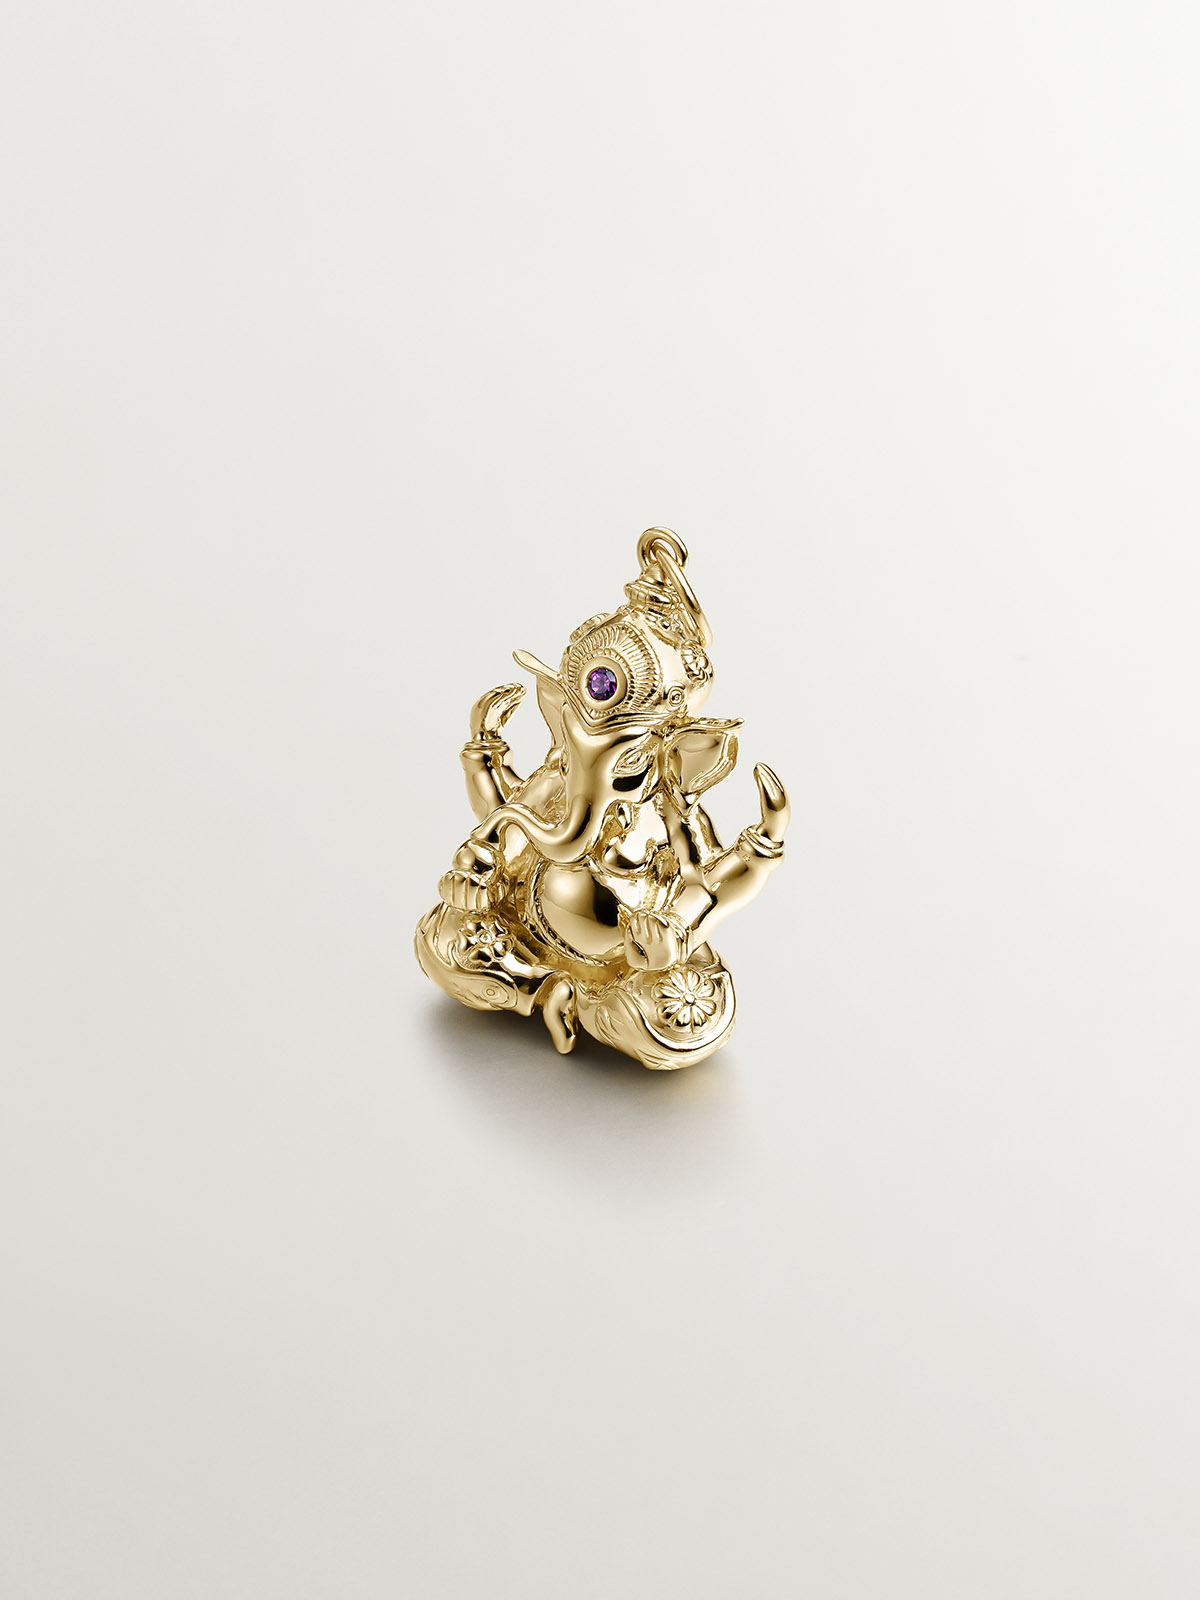 925 silver charm bathed in 18k yellow gold with pink rodolite and elephant shape